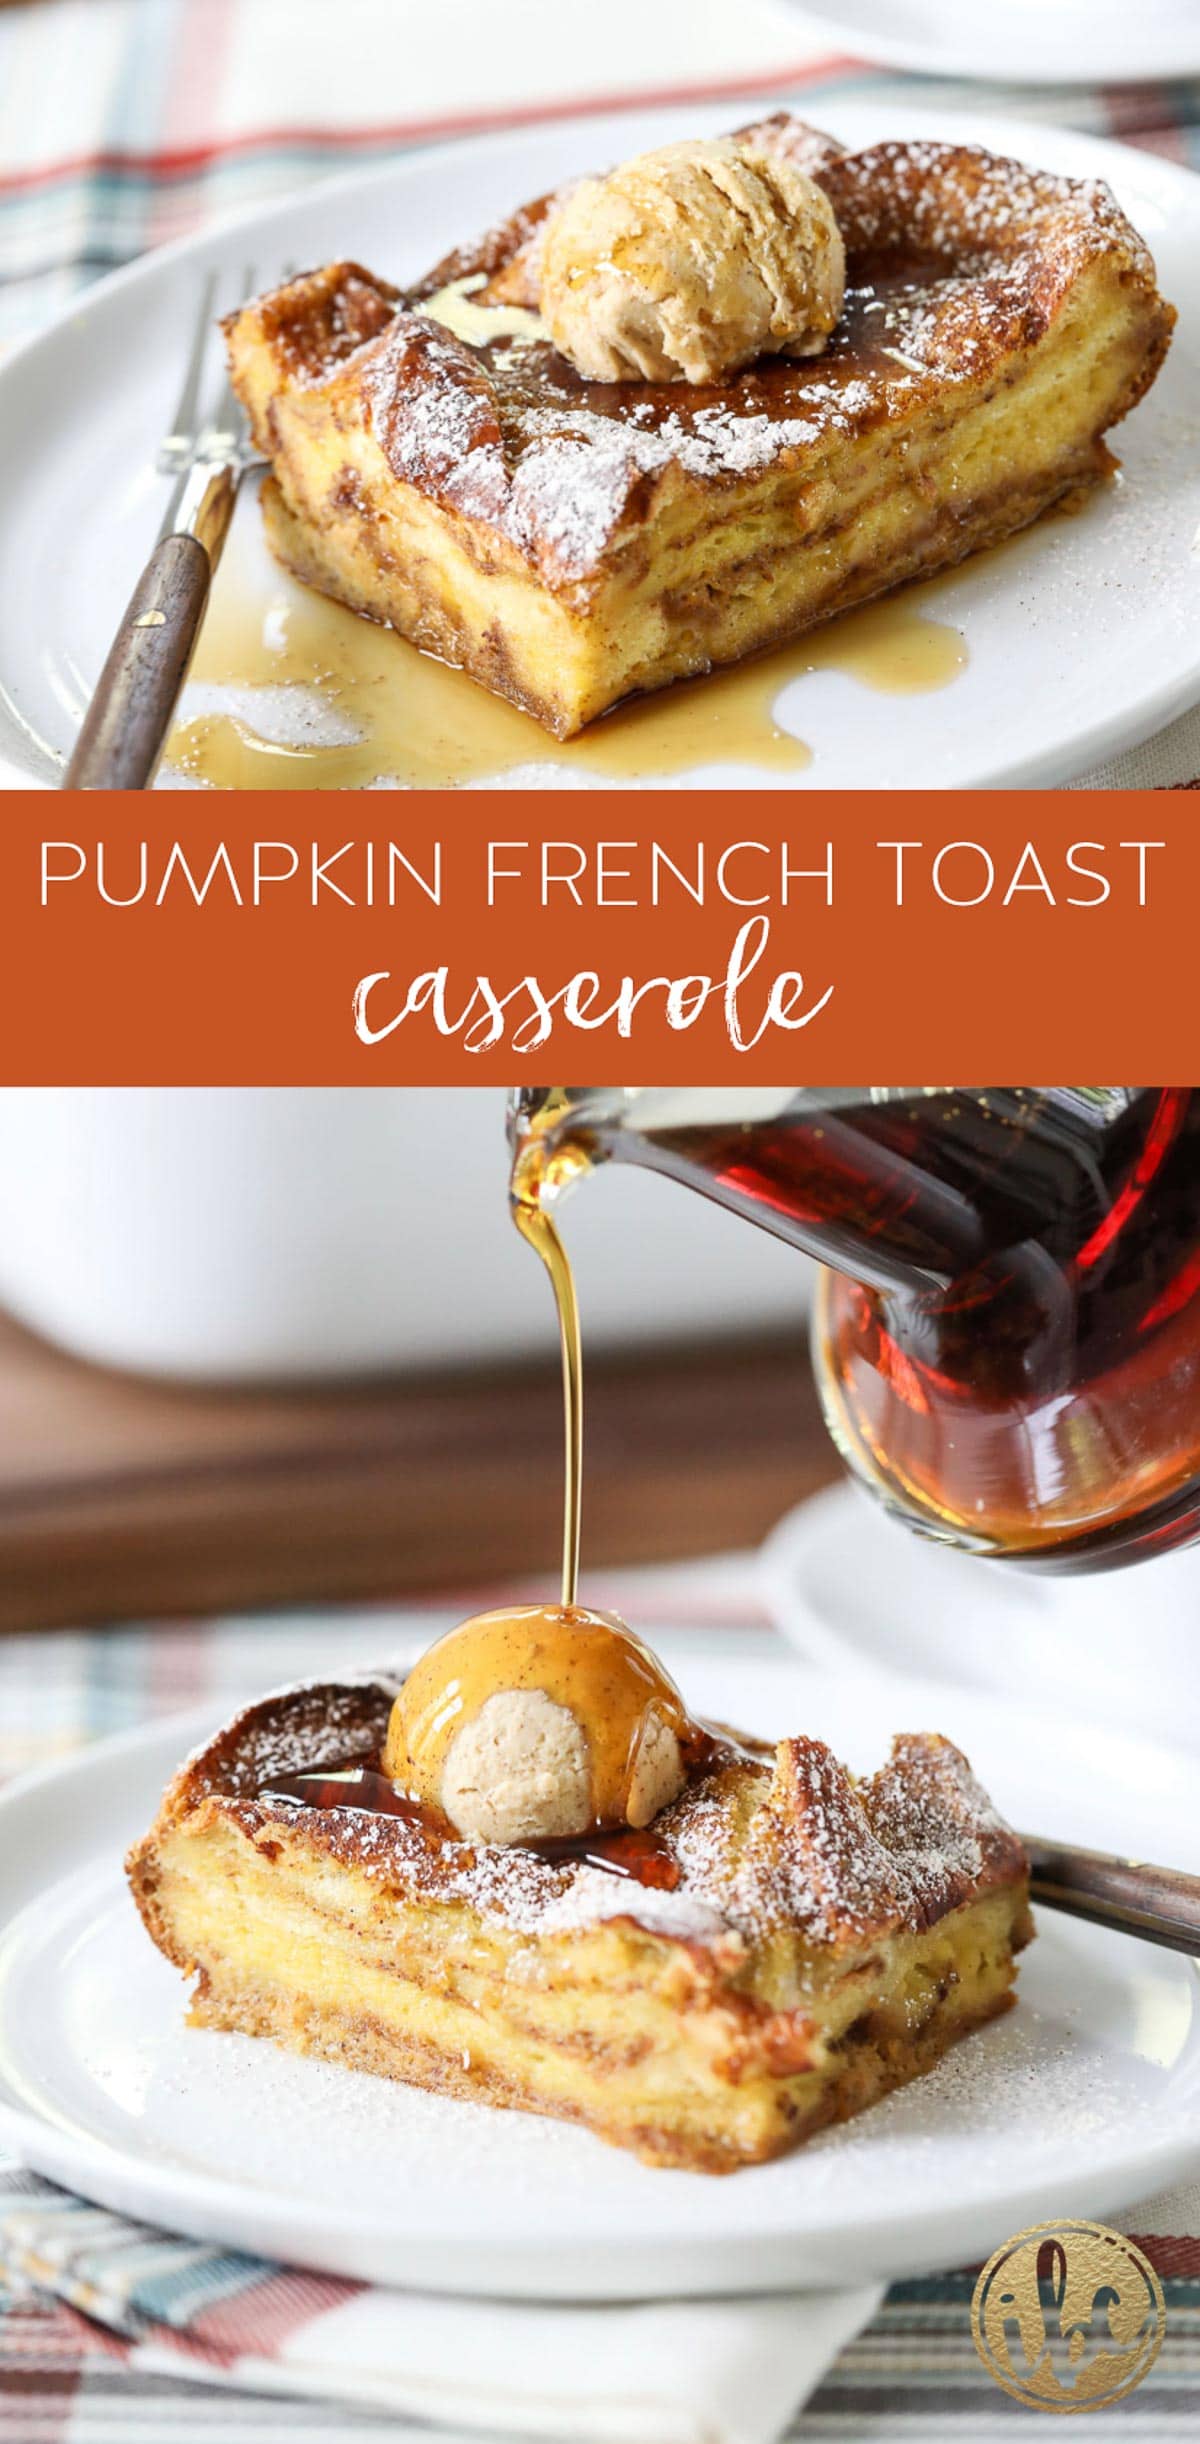 This overnight Pumpkin French Toast Casserole is a delicious and easy fall breakfast recipe! #breakfast #overnight #pumpkin #frenchtoast #casserole #recipe